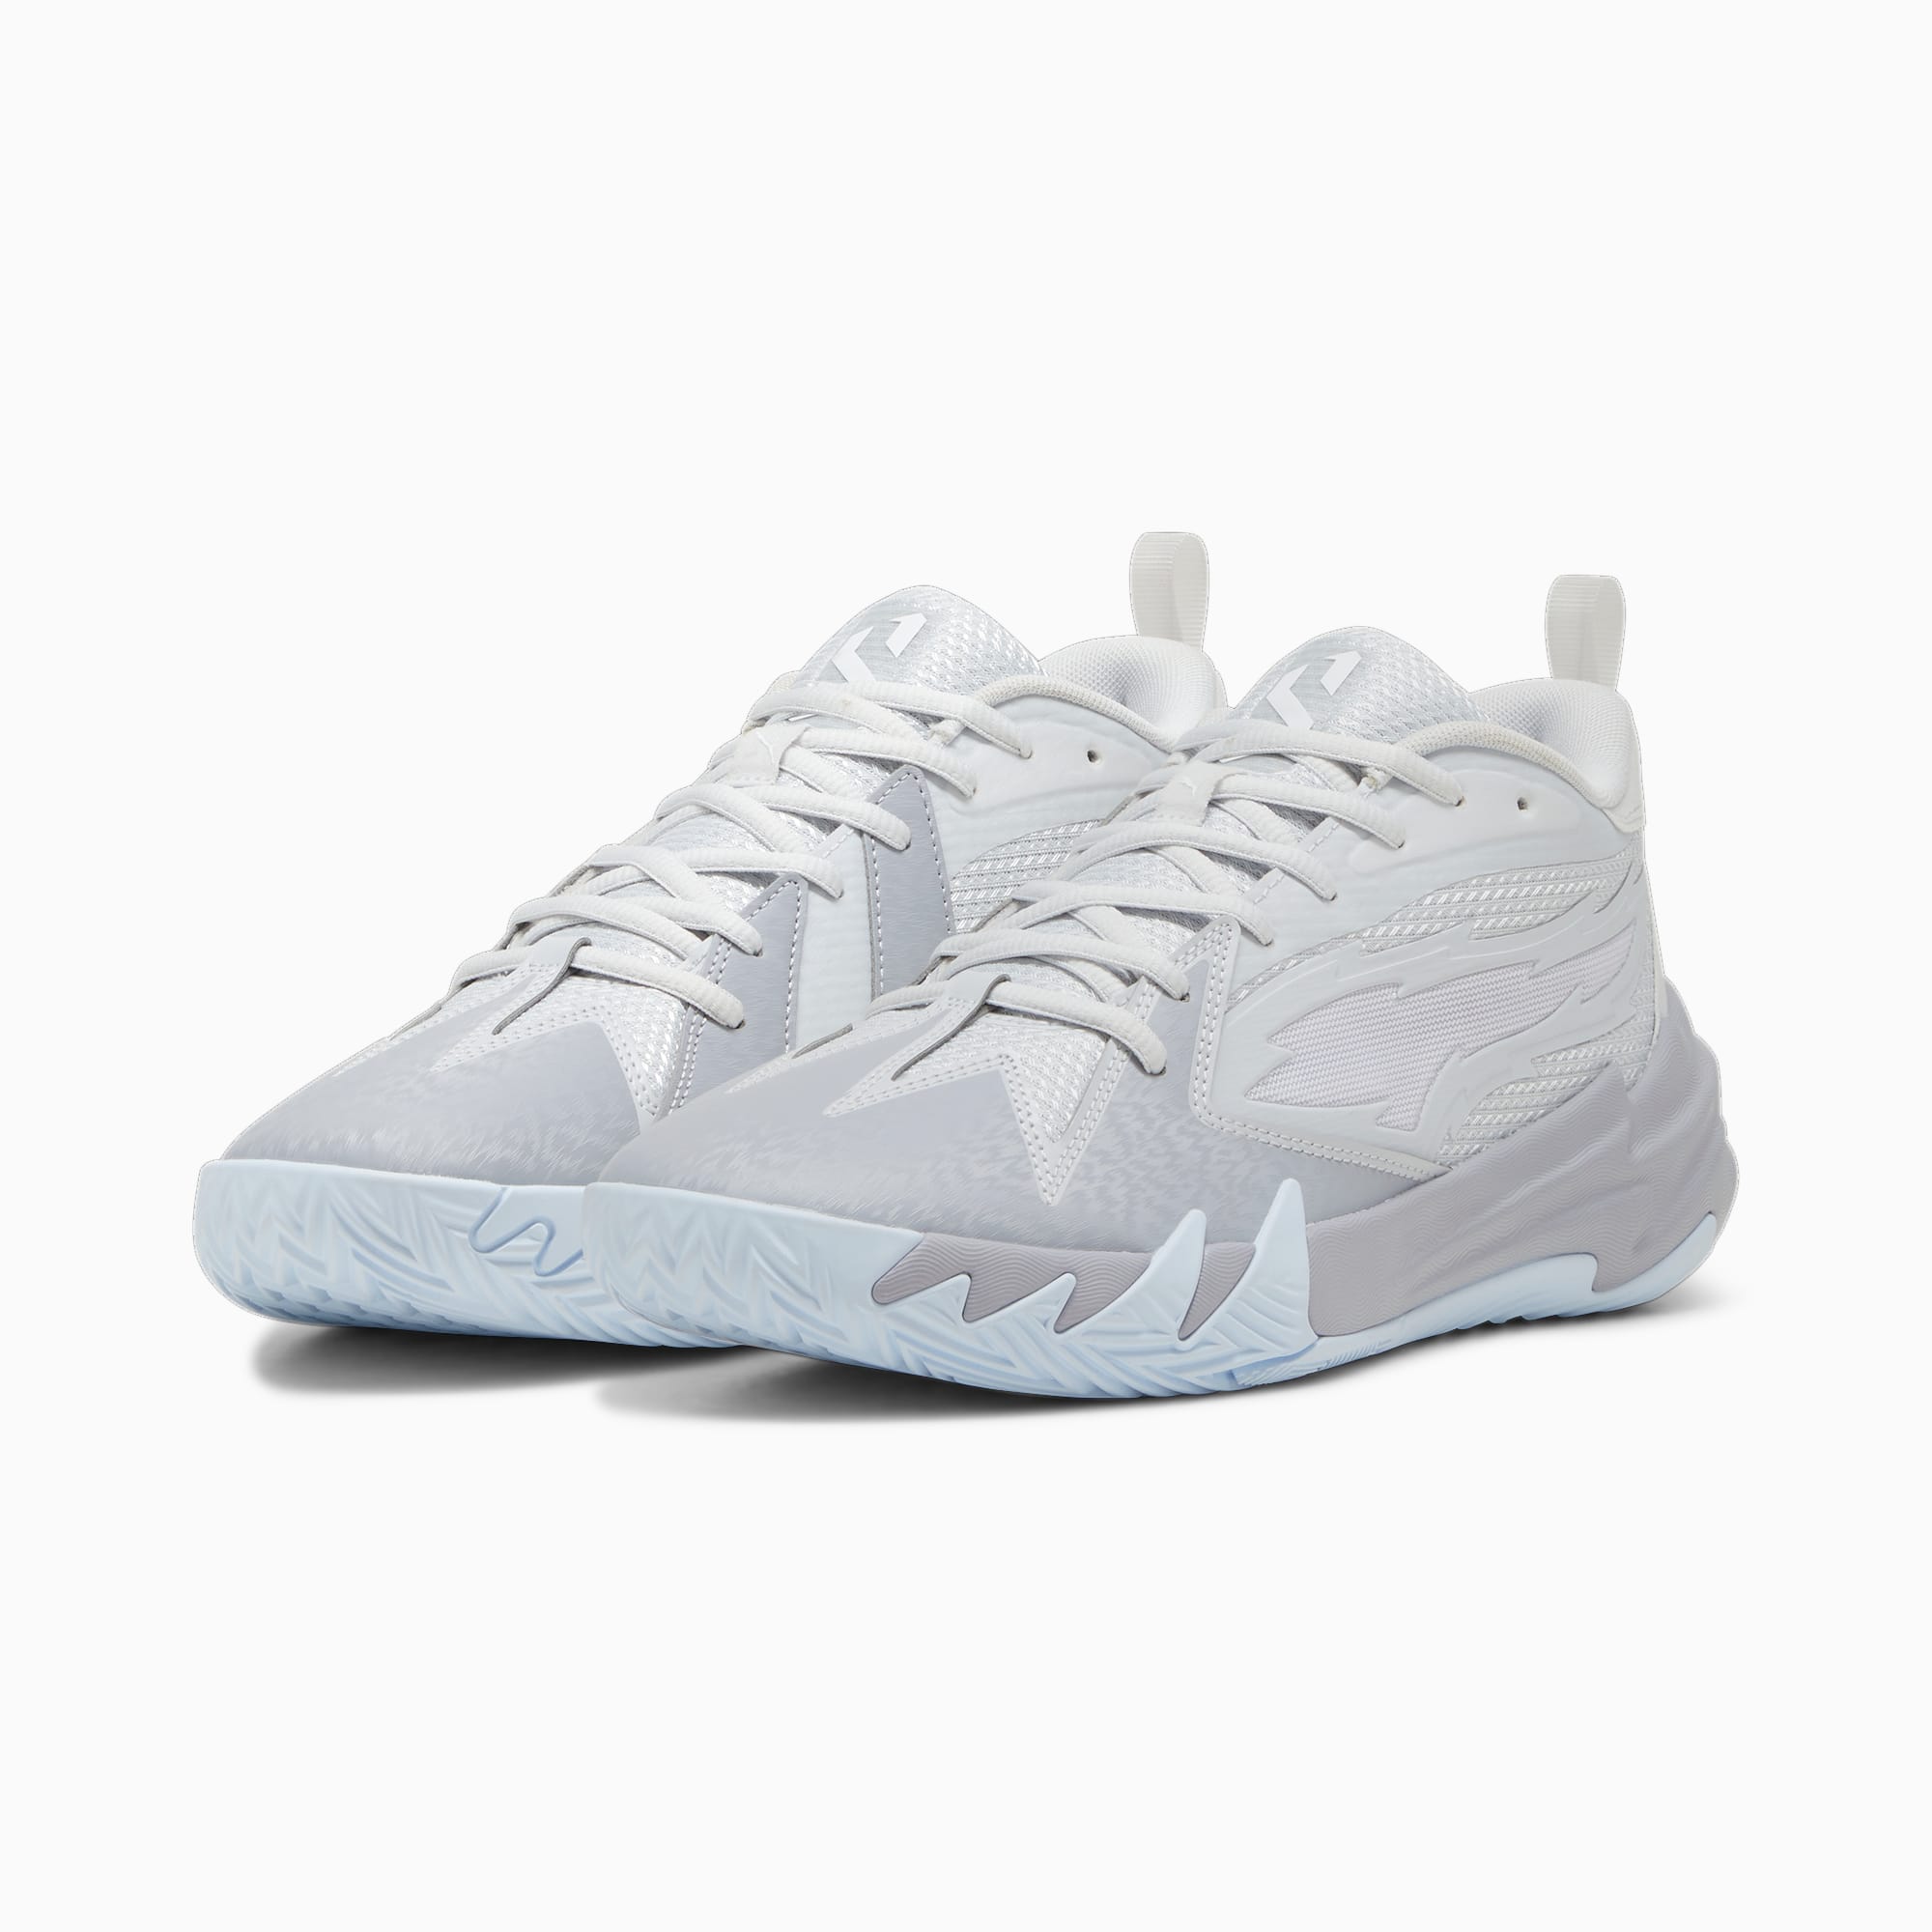 Scoot Zeros Grey Frost Men's Basketball Shoes